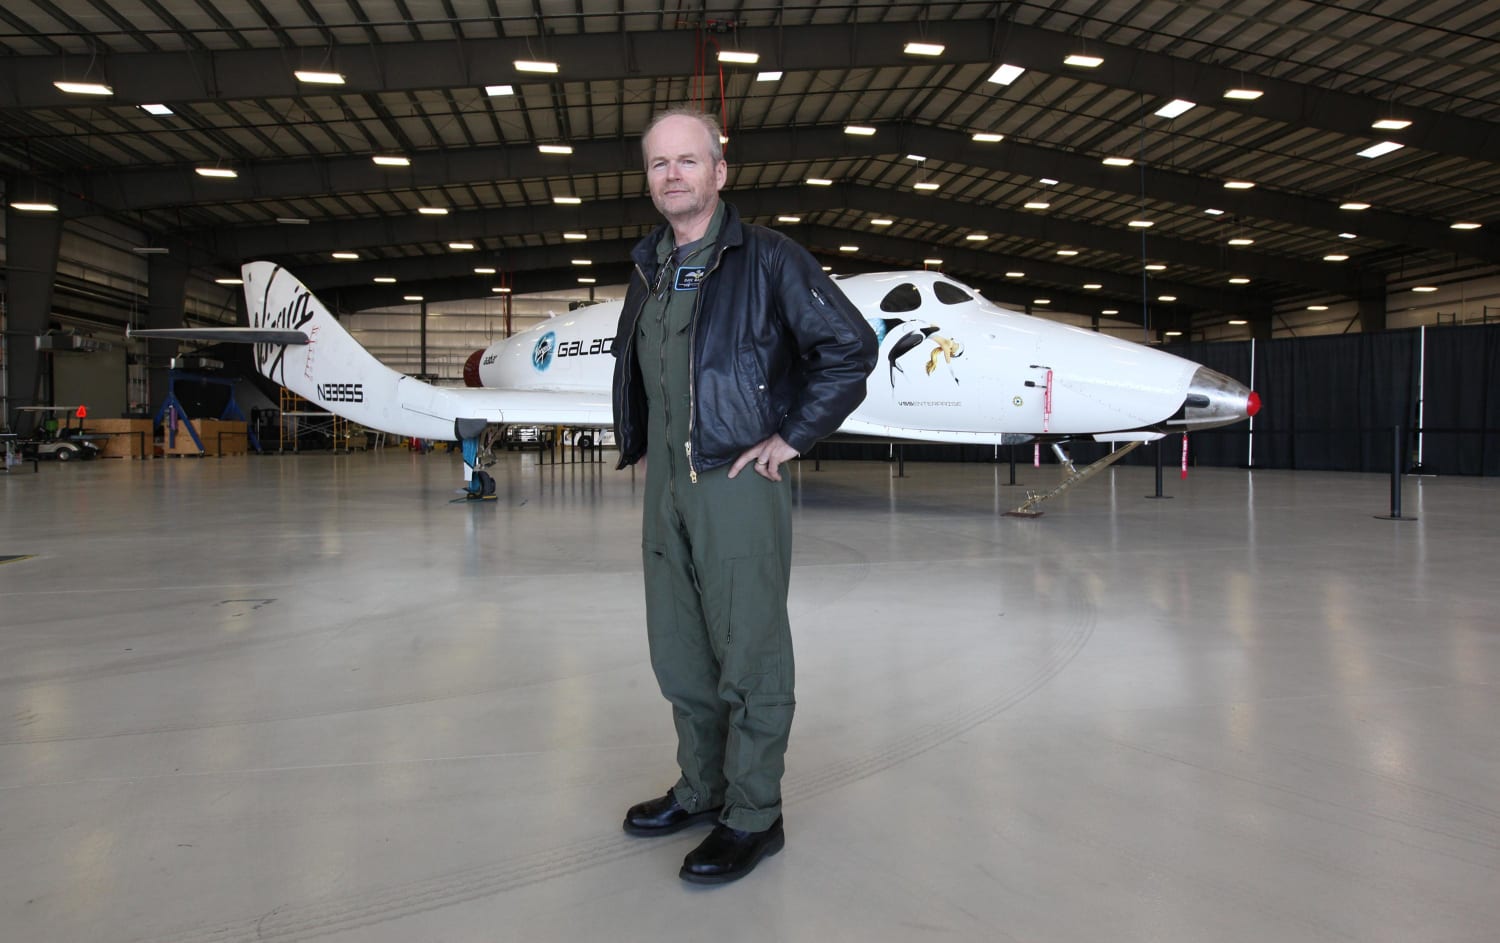 SpaceShipTwo Pilot Gets a Kick From His First Rocket Ride - NBC News3000 x 1885